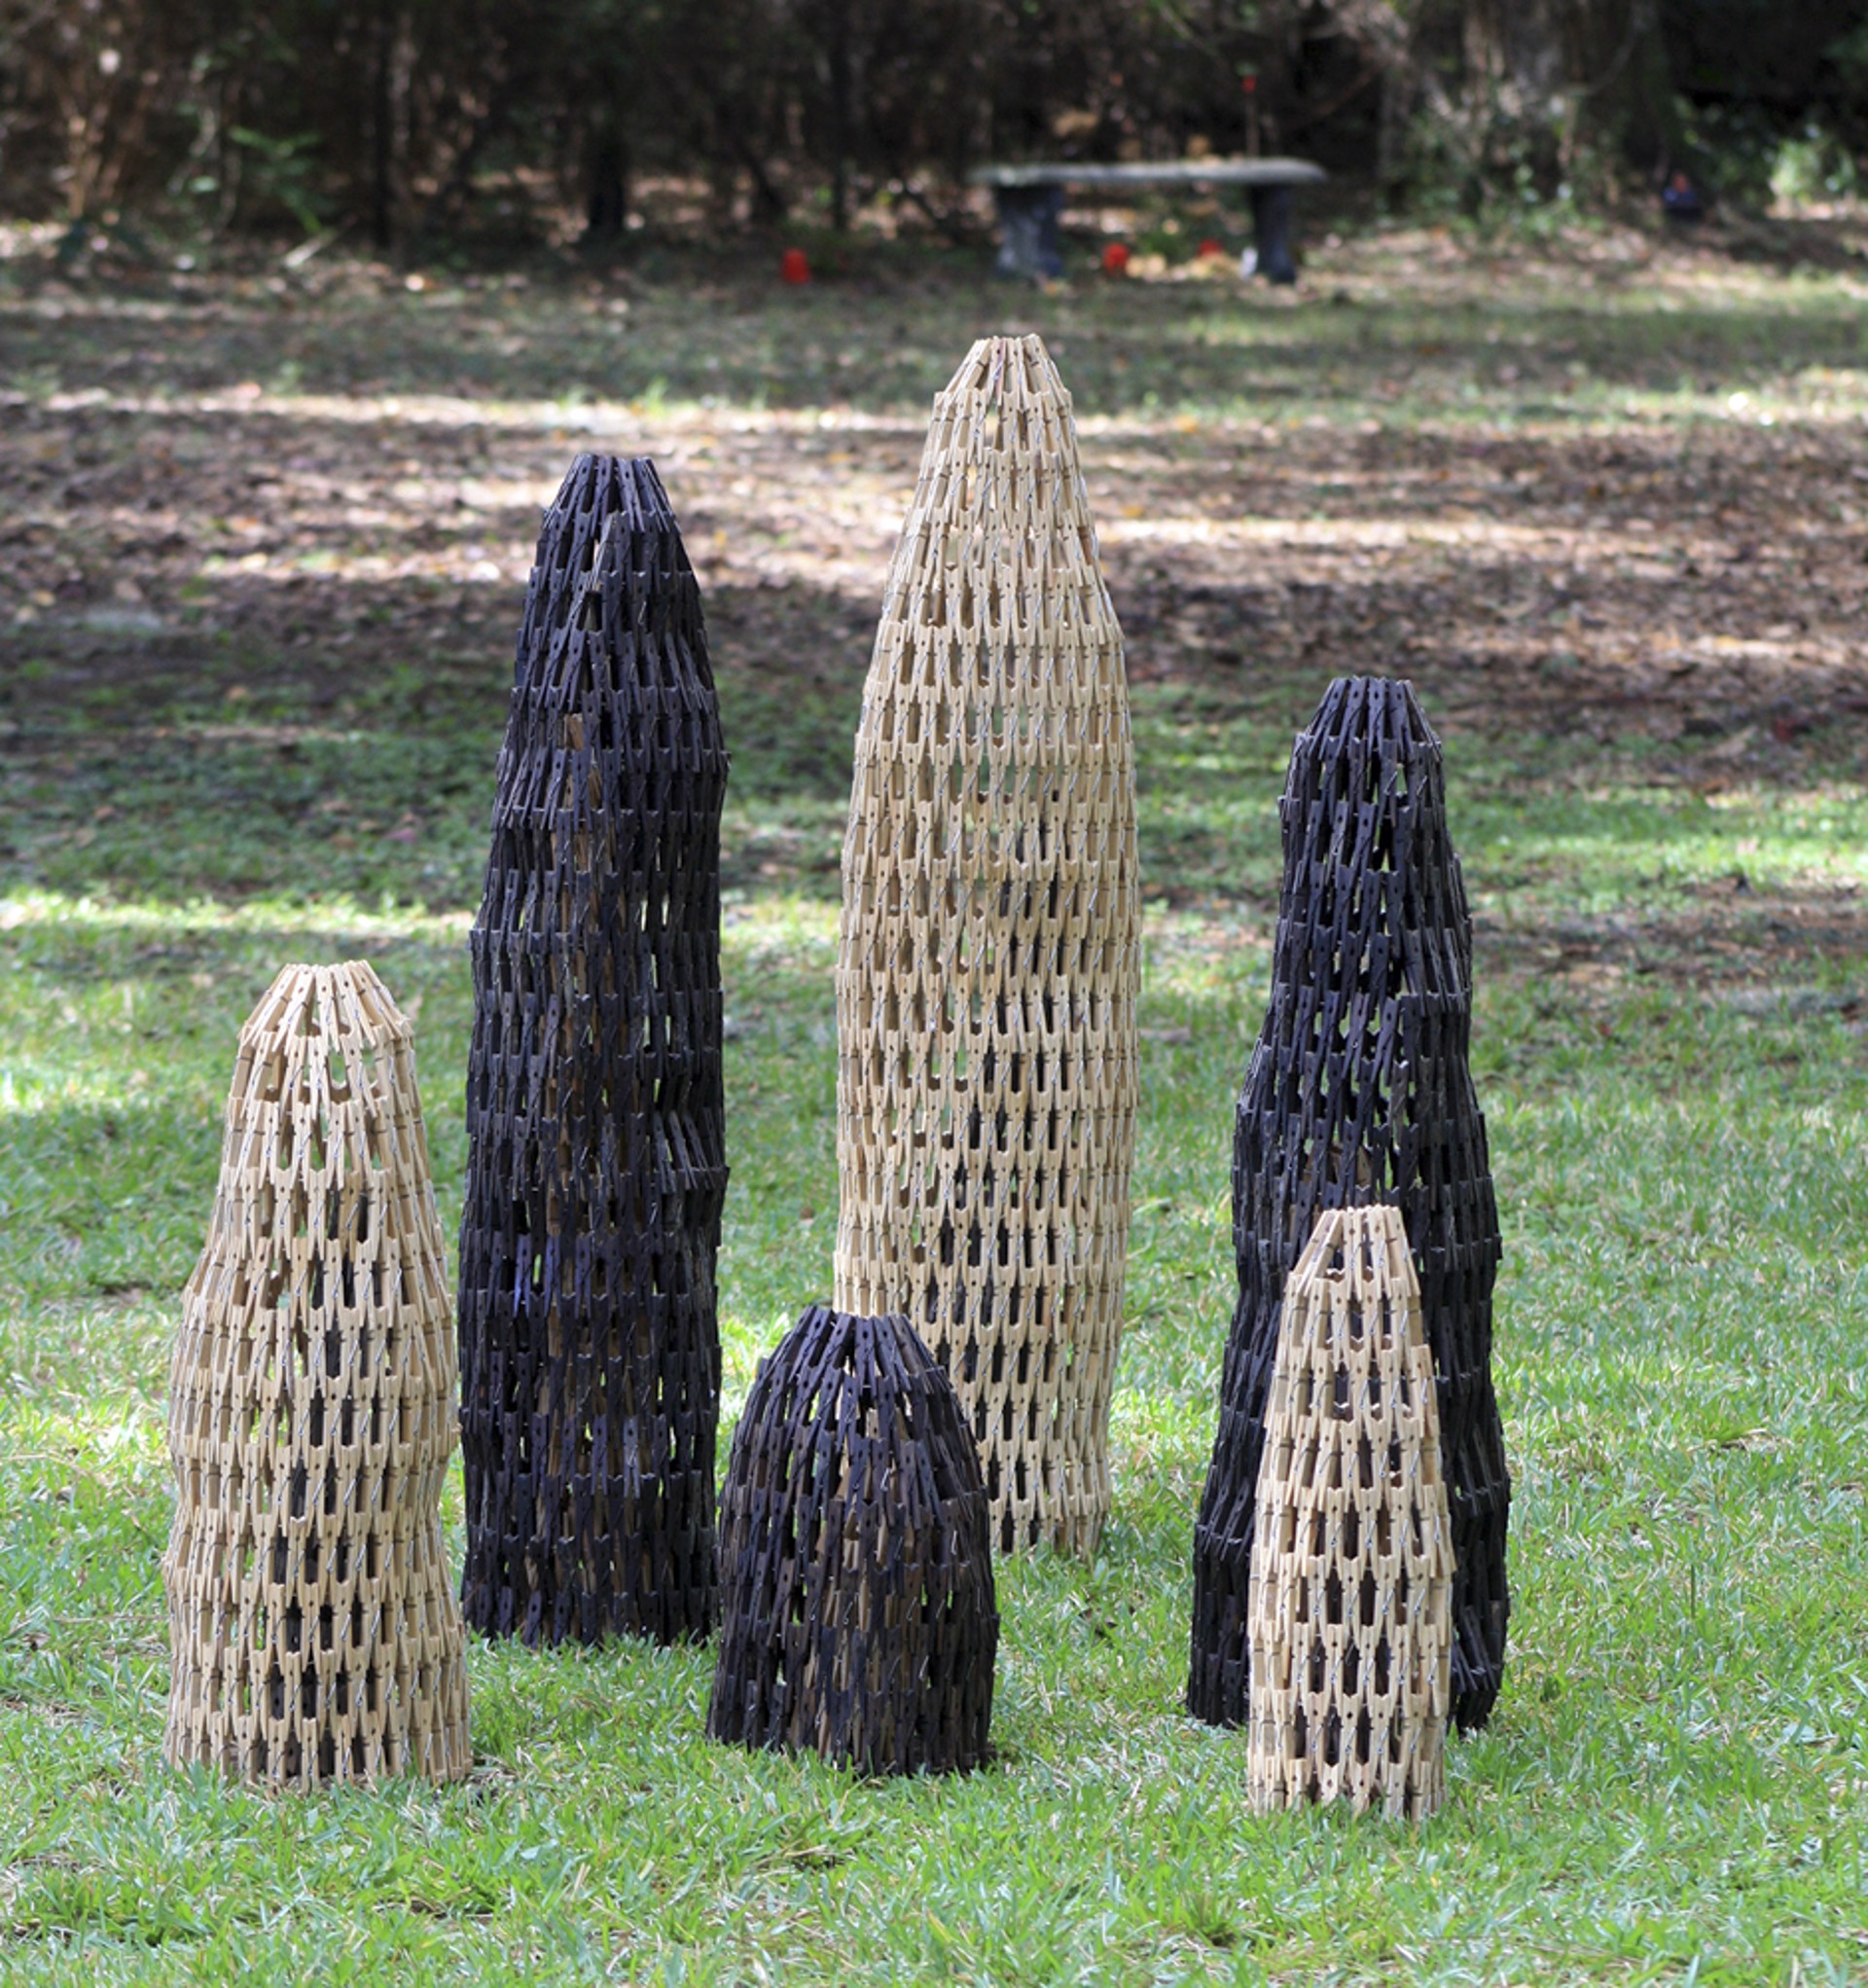 Cypress Knees (6 pieces) by Gerry Stecca